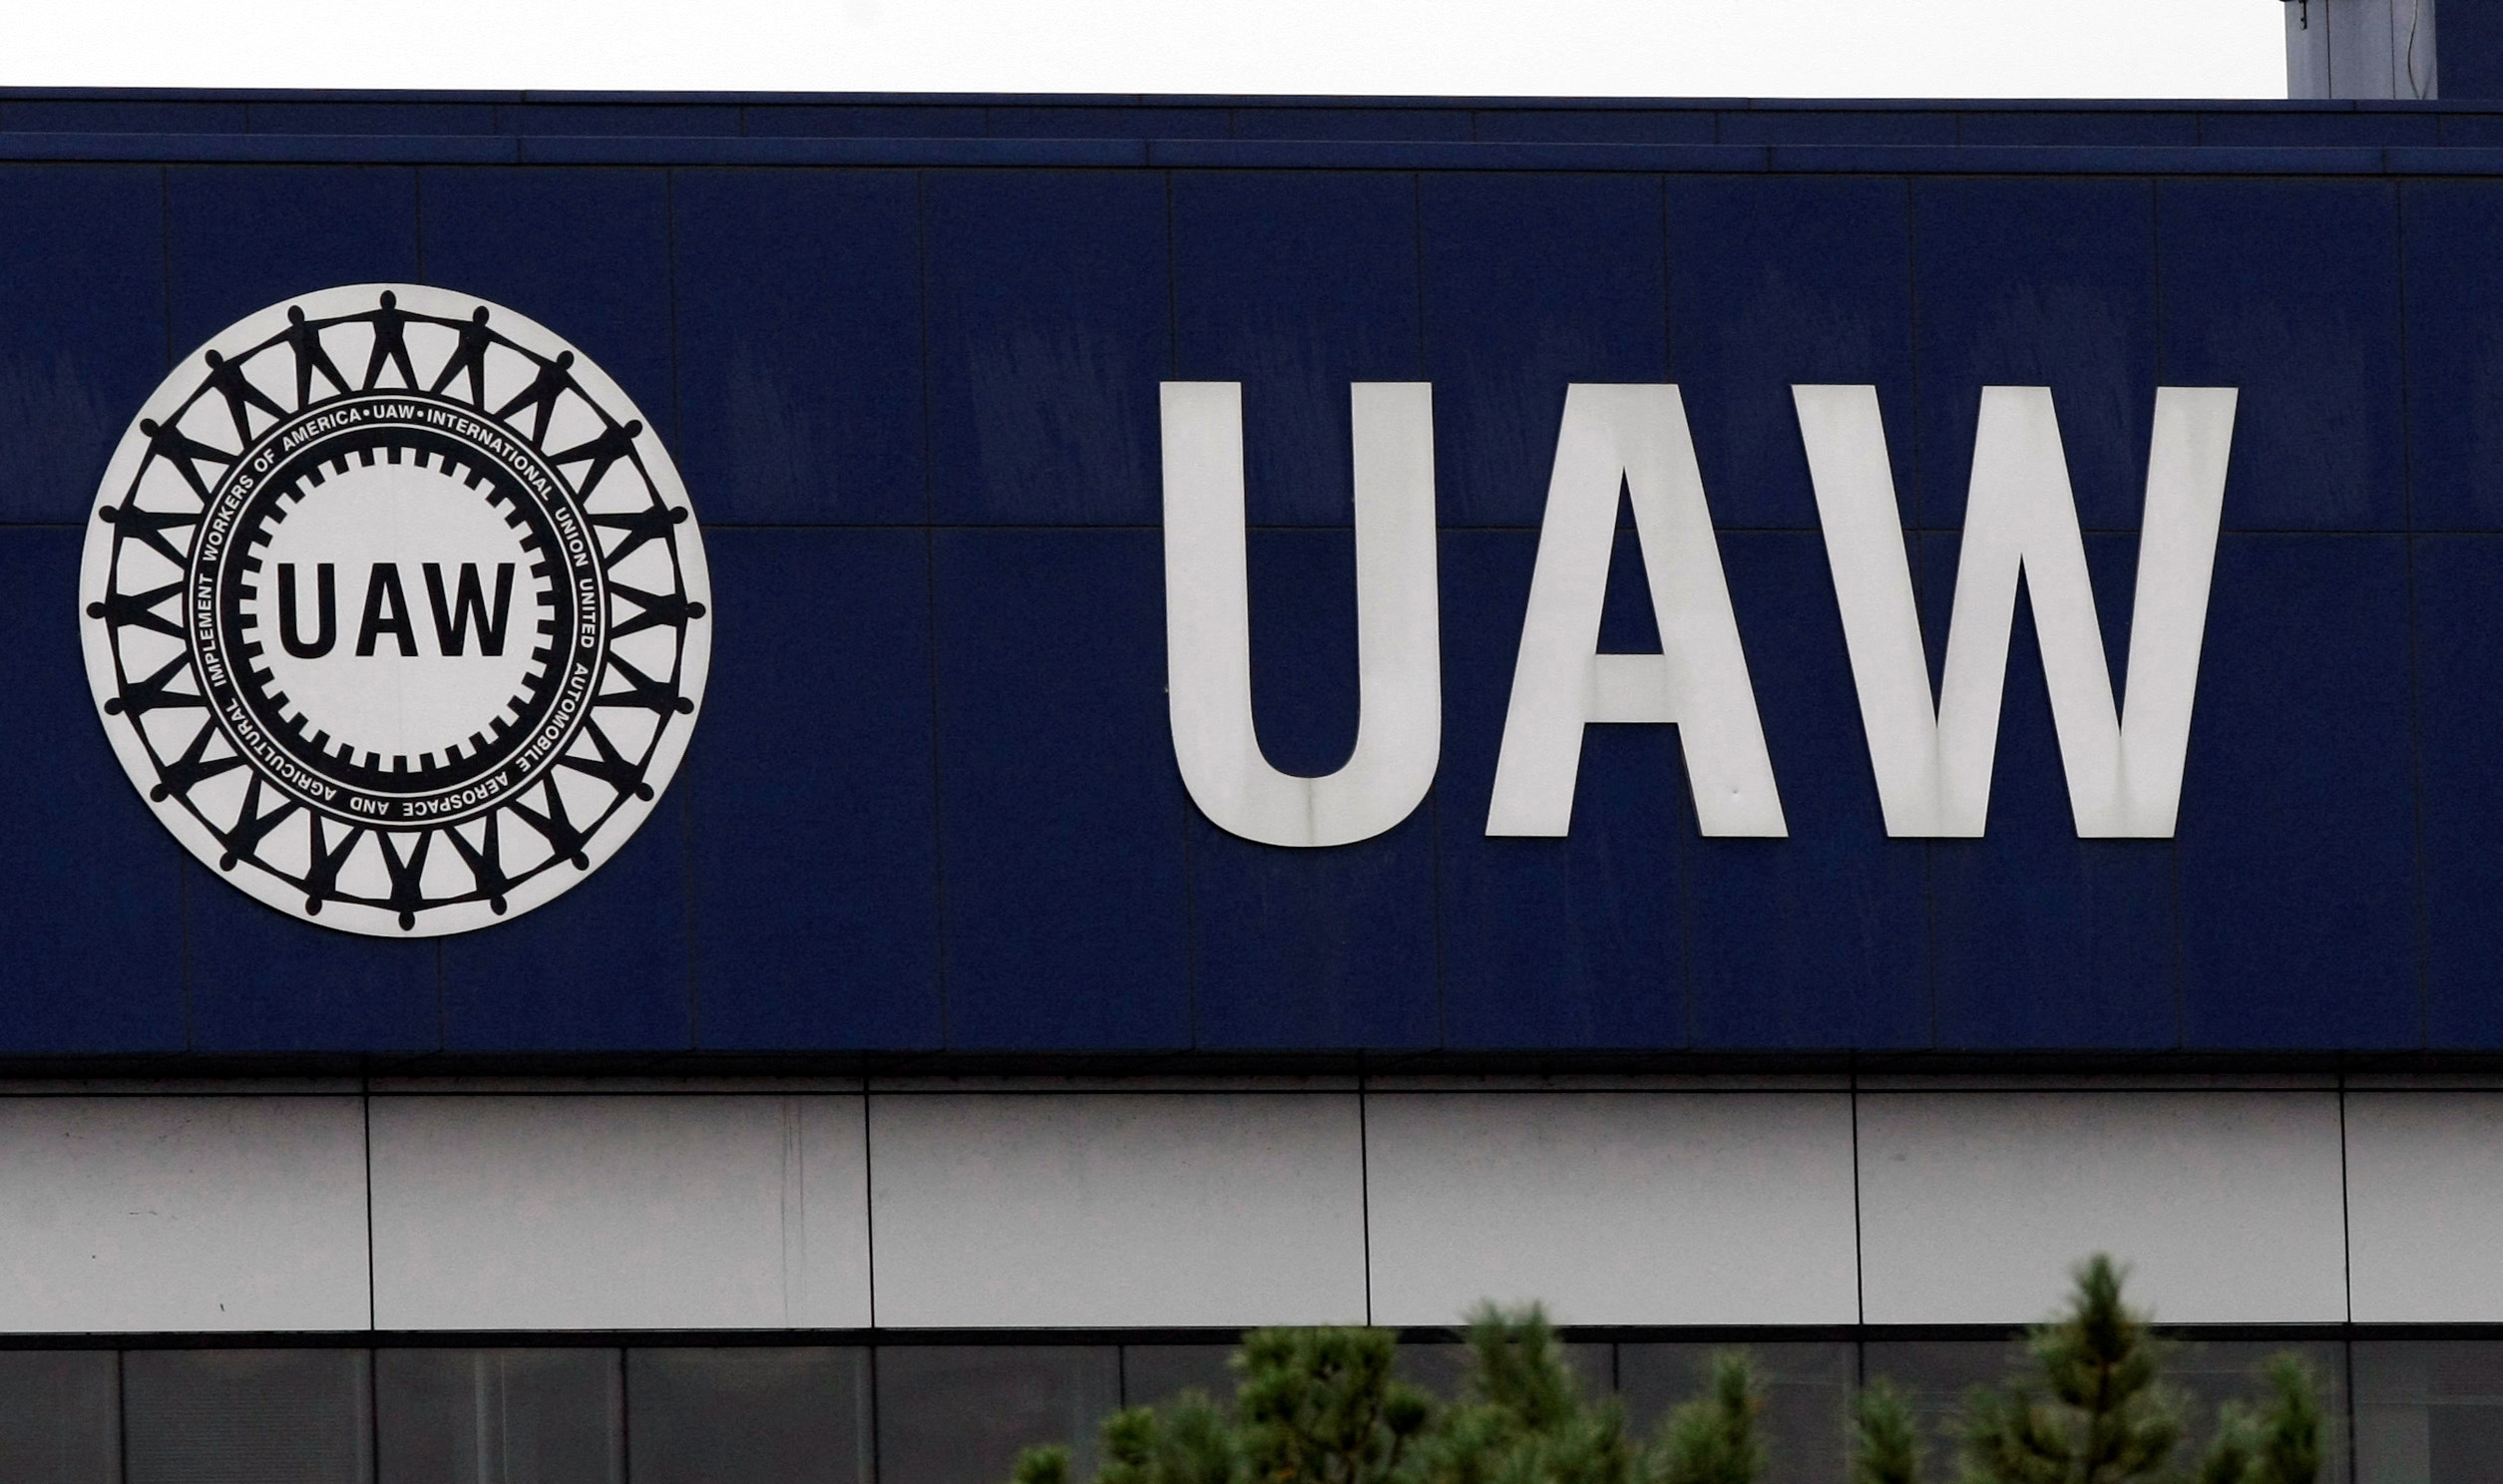 UAW members at Allison Transmission vote to ratify new four-year contract